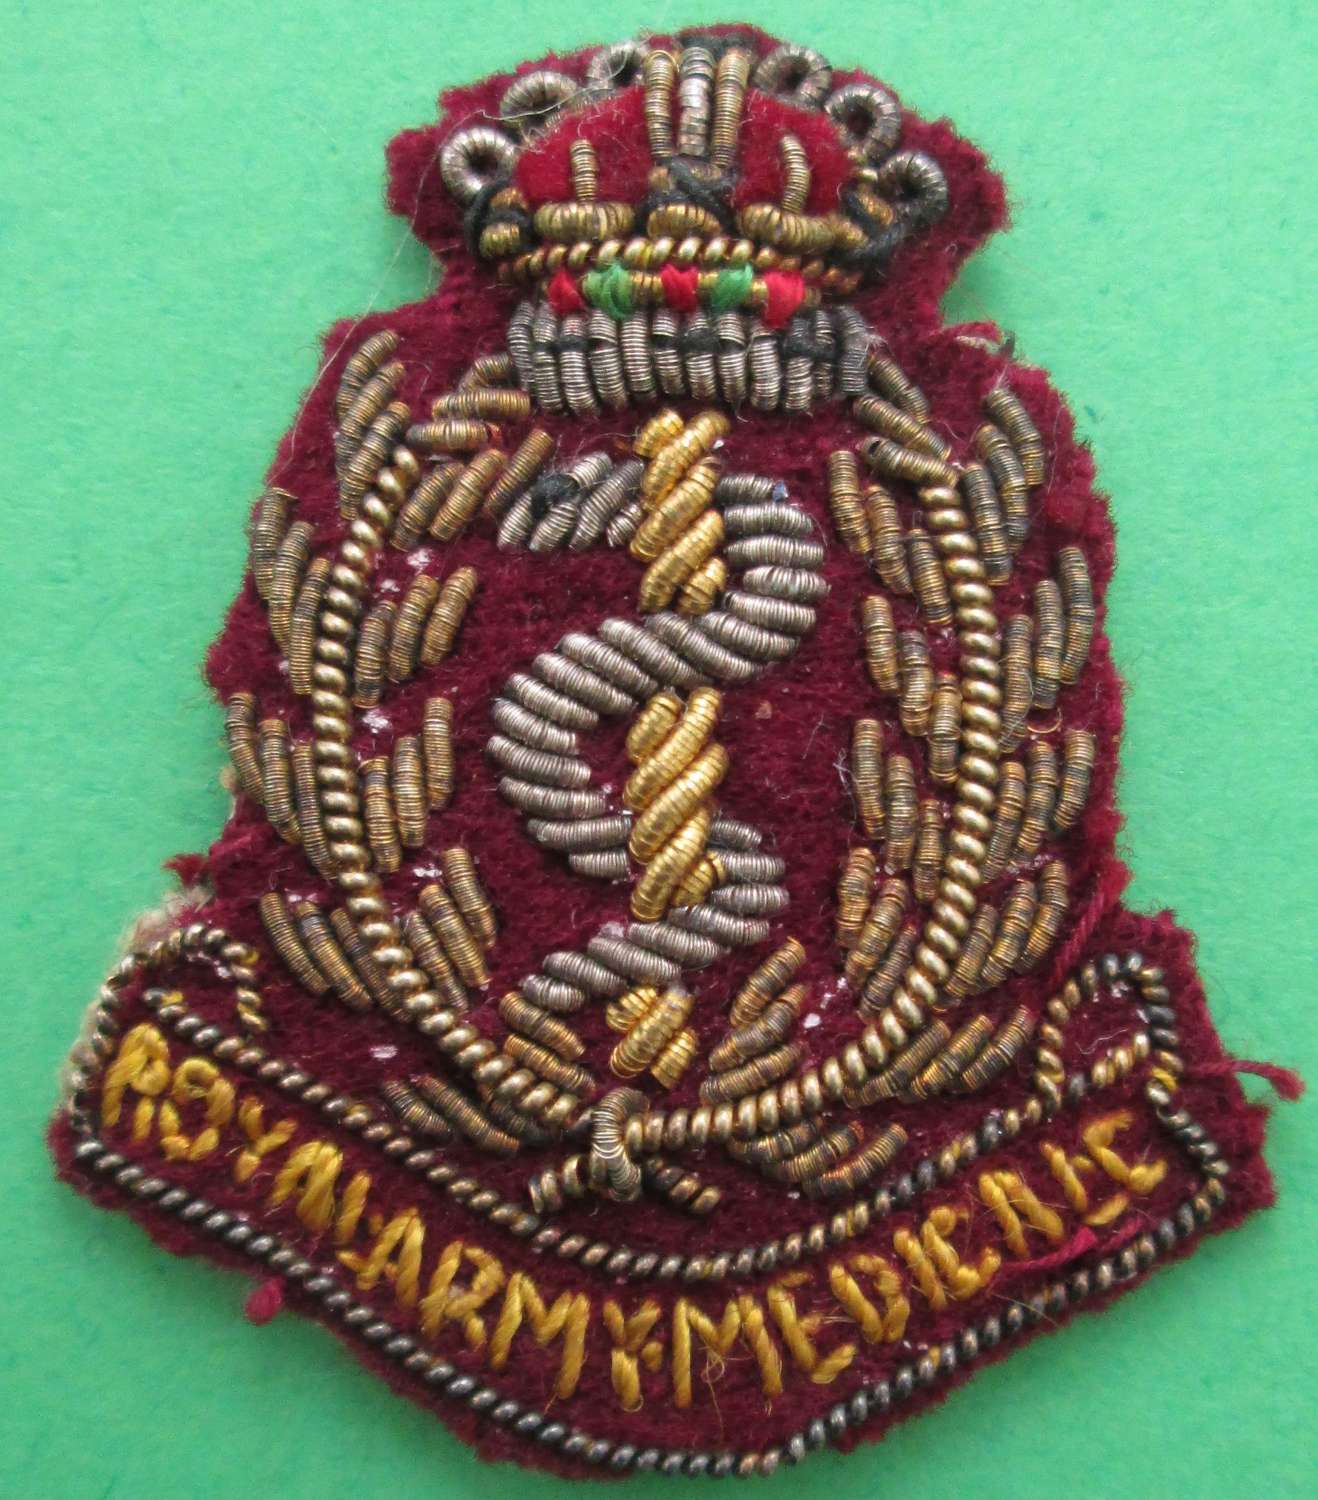 A VERY GOOD WWII PERIOD RAMC AIRBORNE FORCES BERET BADGE